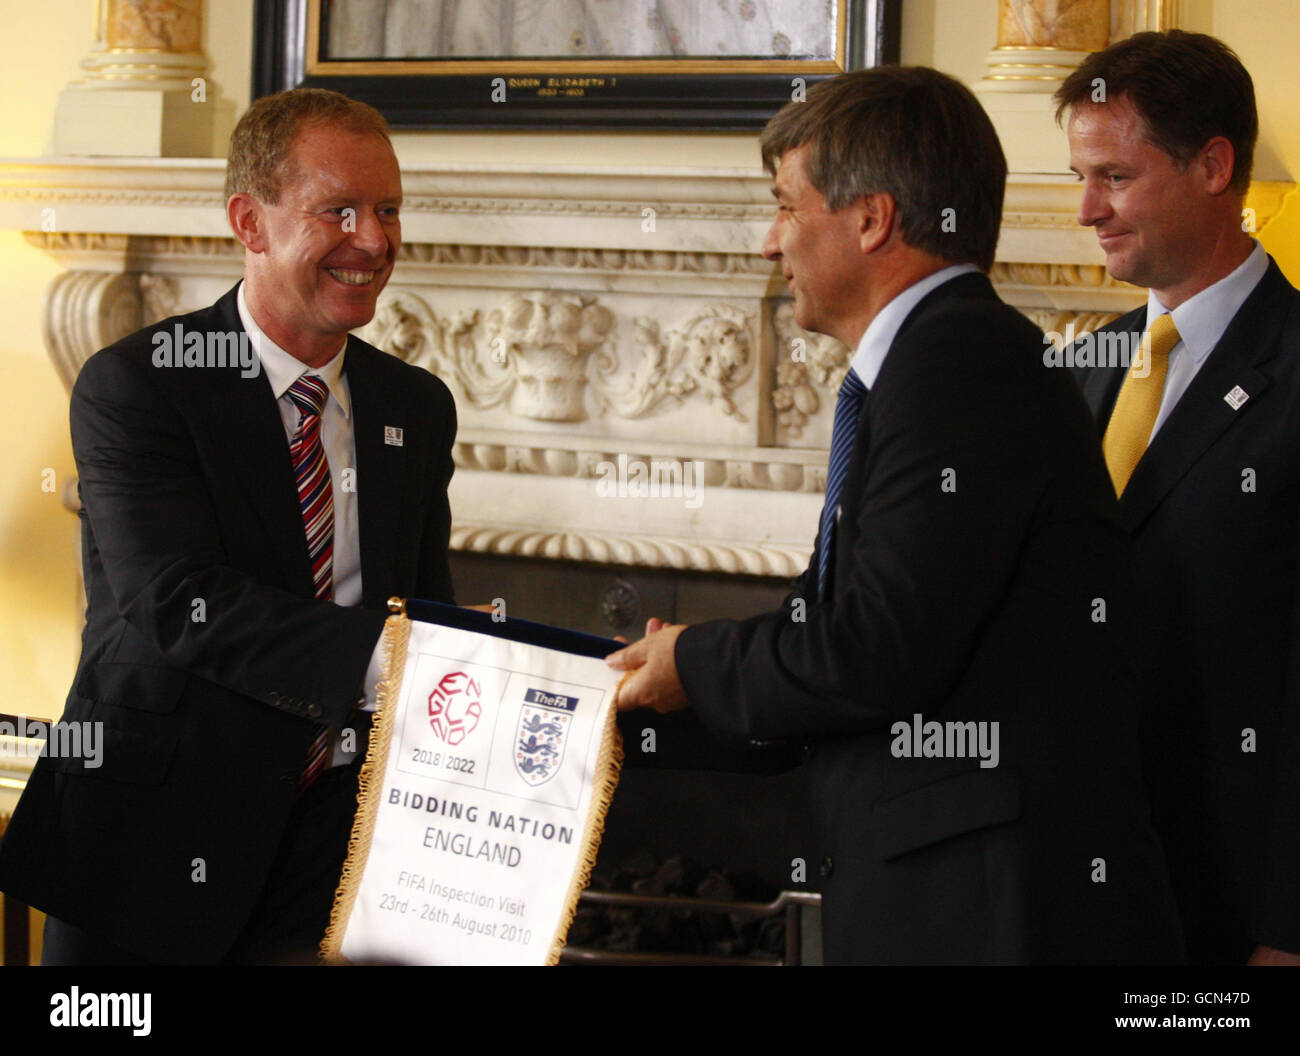 England 2018 CEO Andy Anson (left) presents a pennant to Leader of the FIFA inspection team Harold Mayne Nicholls during a football World Cup 2018 bid event at Number 10, Downing Street in London. Stock Photo